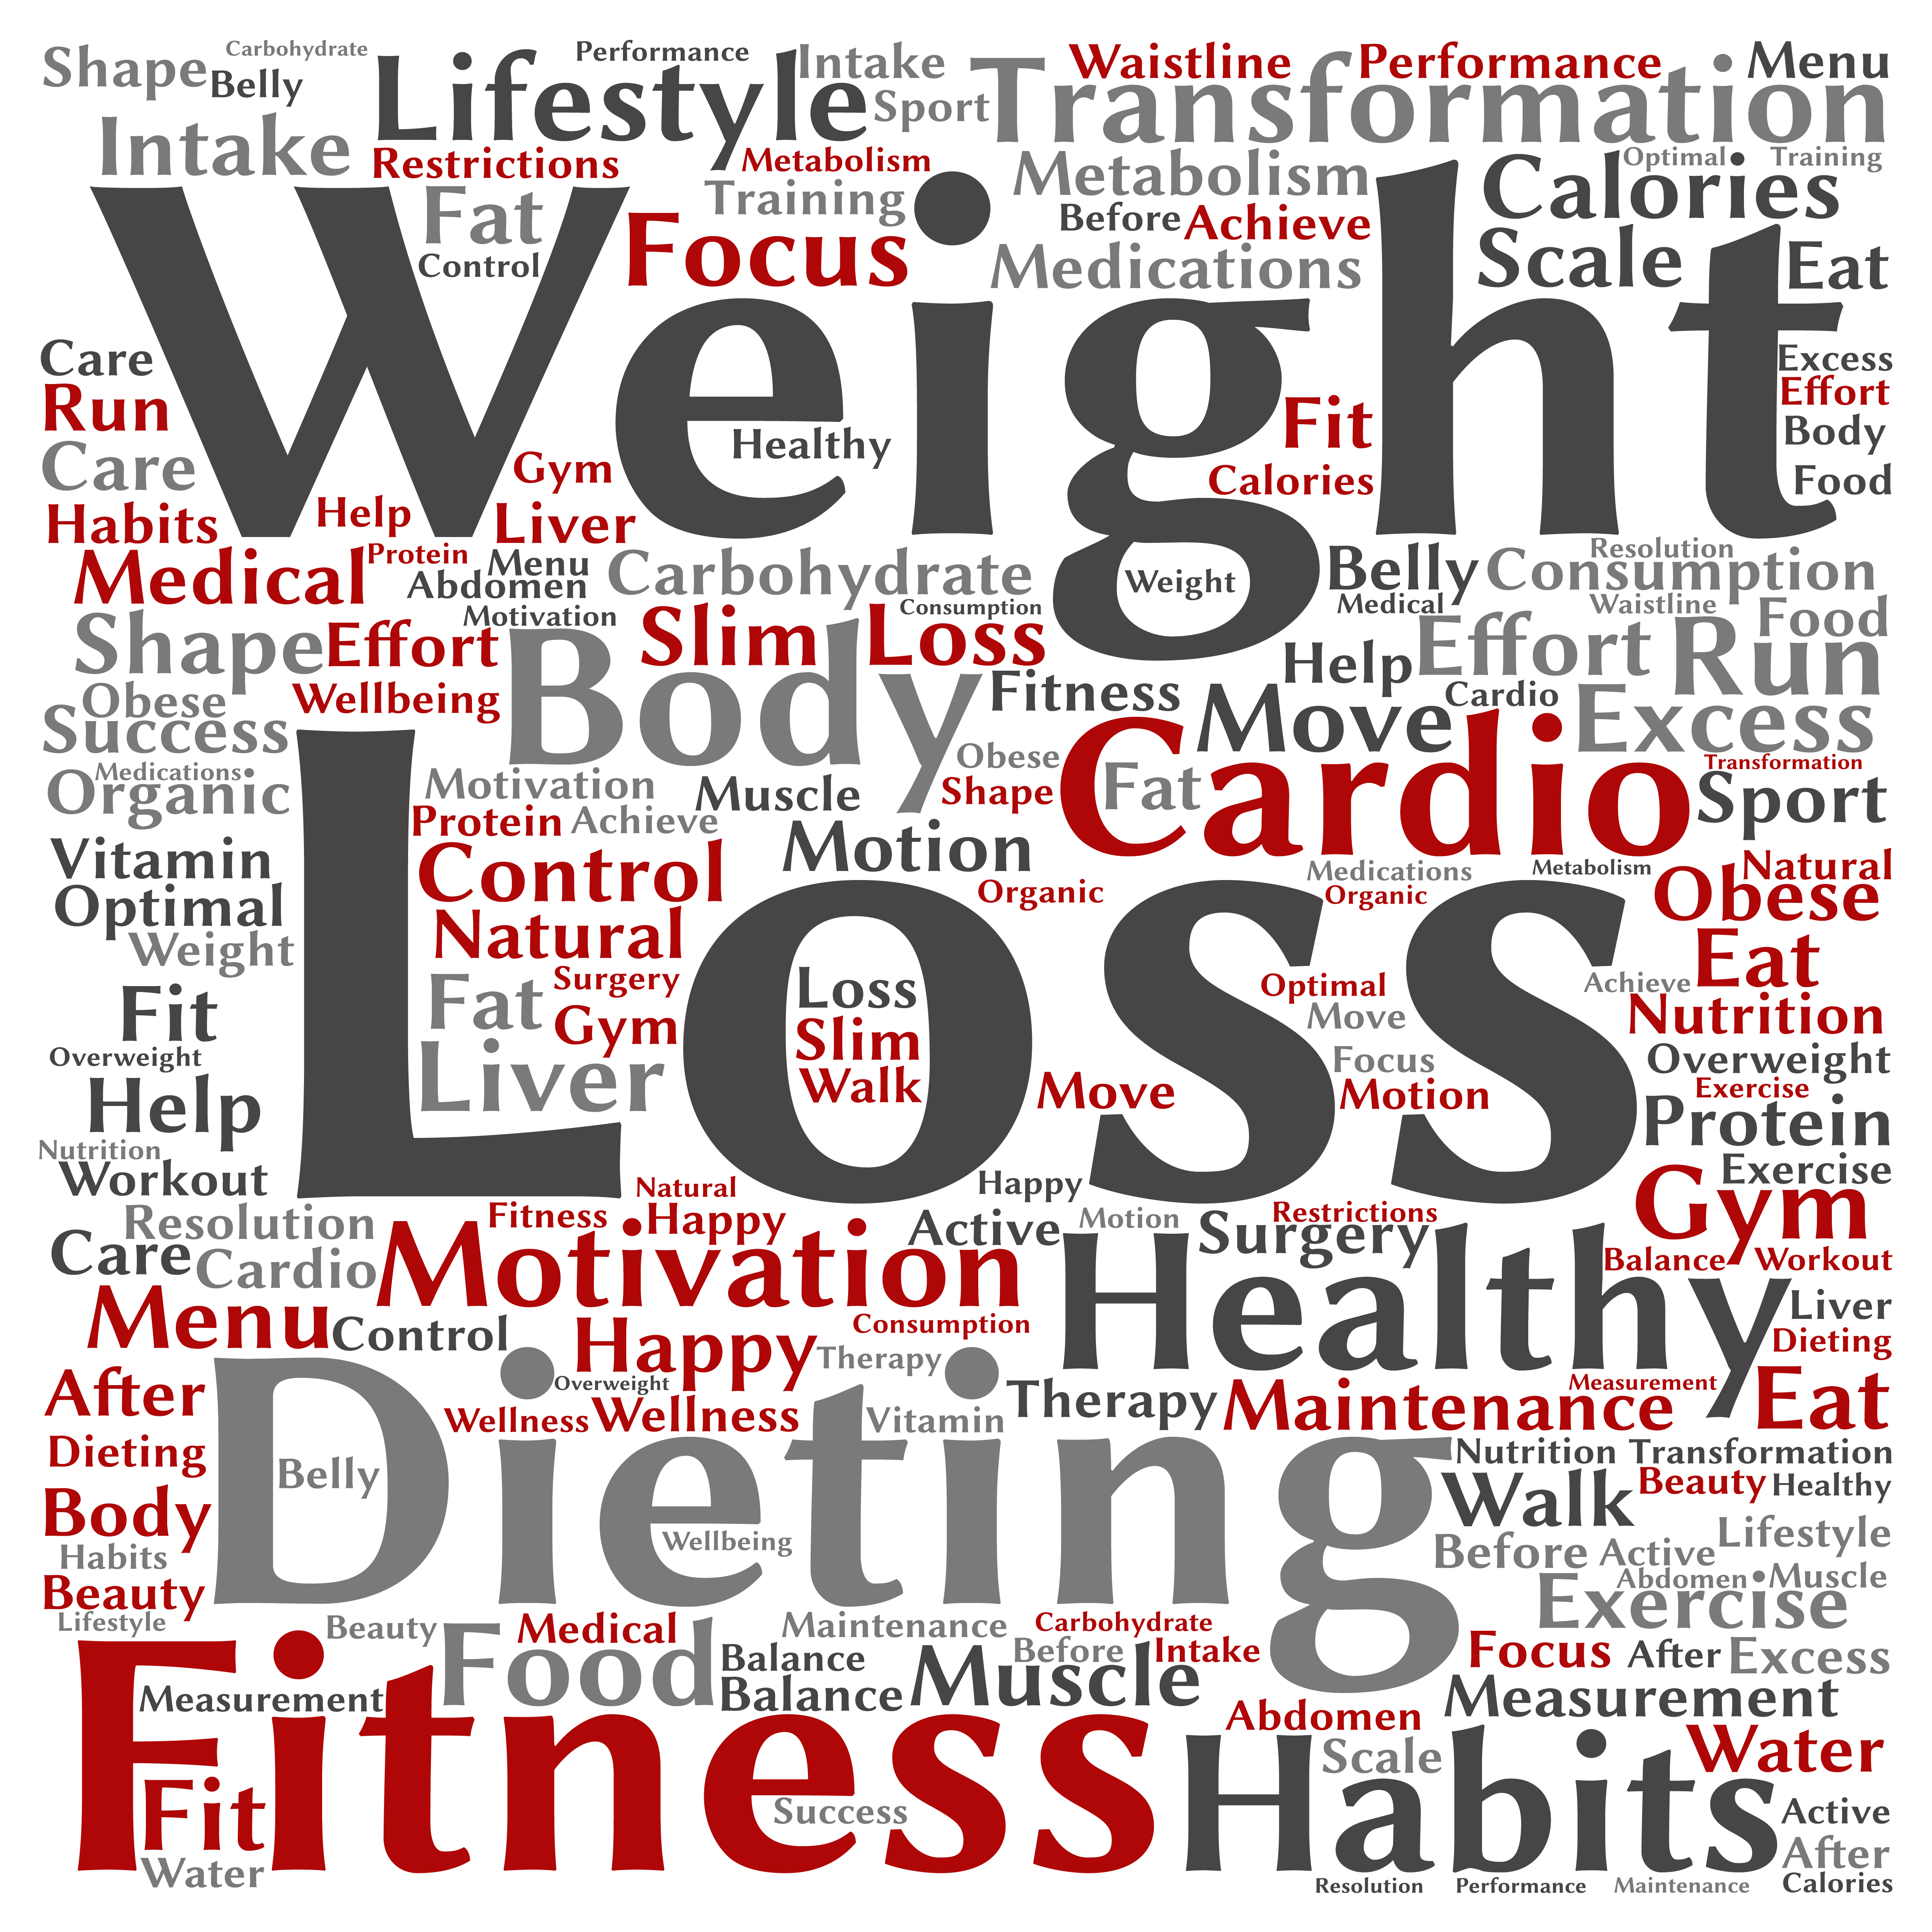 Self hypnosis for weight loss - a collage of weight loss and healthy lifestyle words in various sizes and shades of gray and red